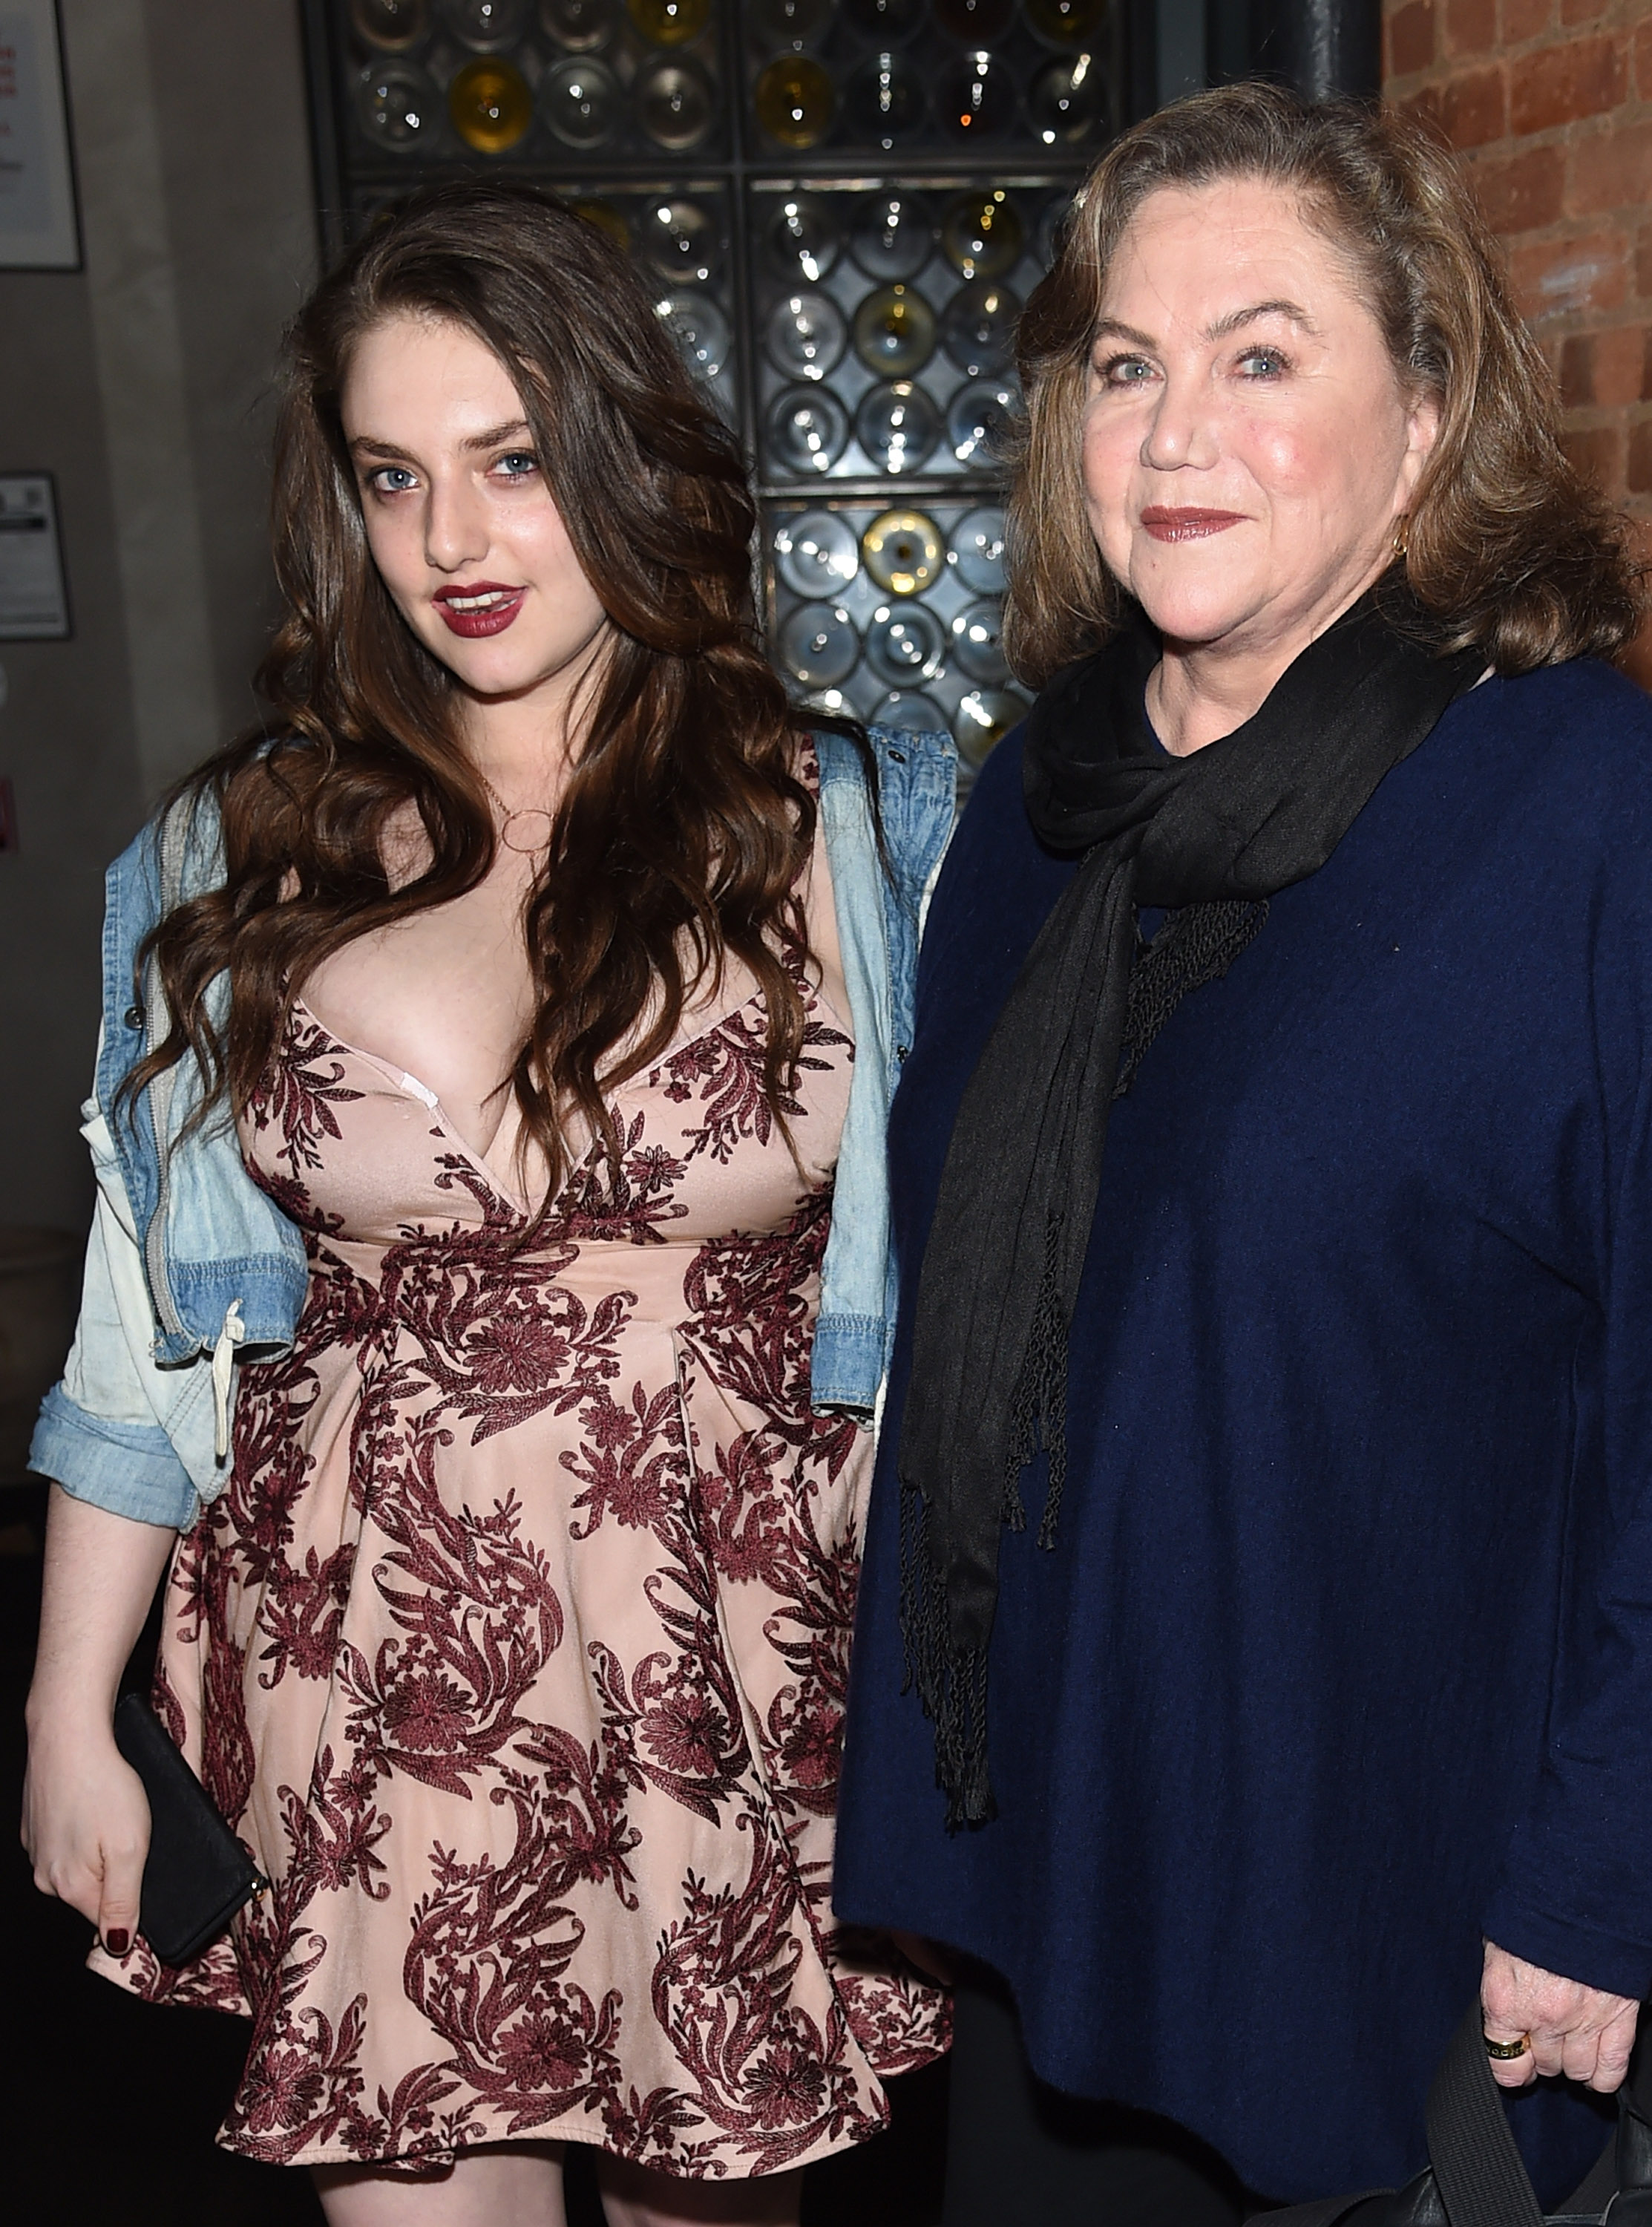 Rachel Weiss and Kathleen Turner attend the after party for the screening of "Pirates Of The Caribbean: Dead Men Tell No Tales" at Chef's Club on May 23, 2017 in New York City. | Sources: Getty Images